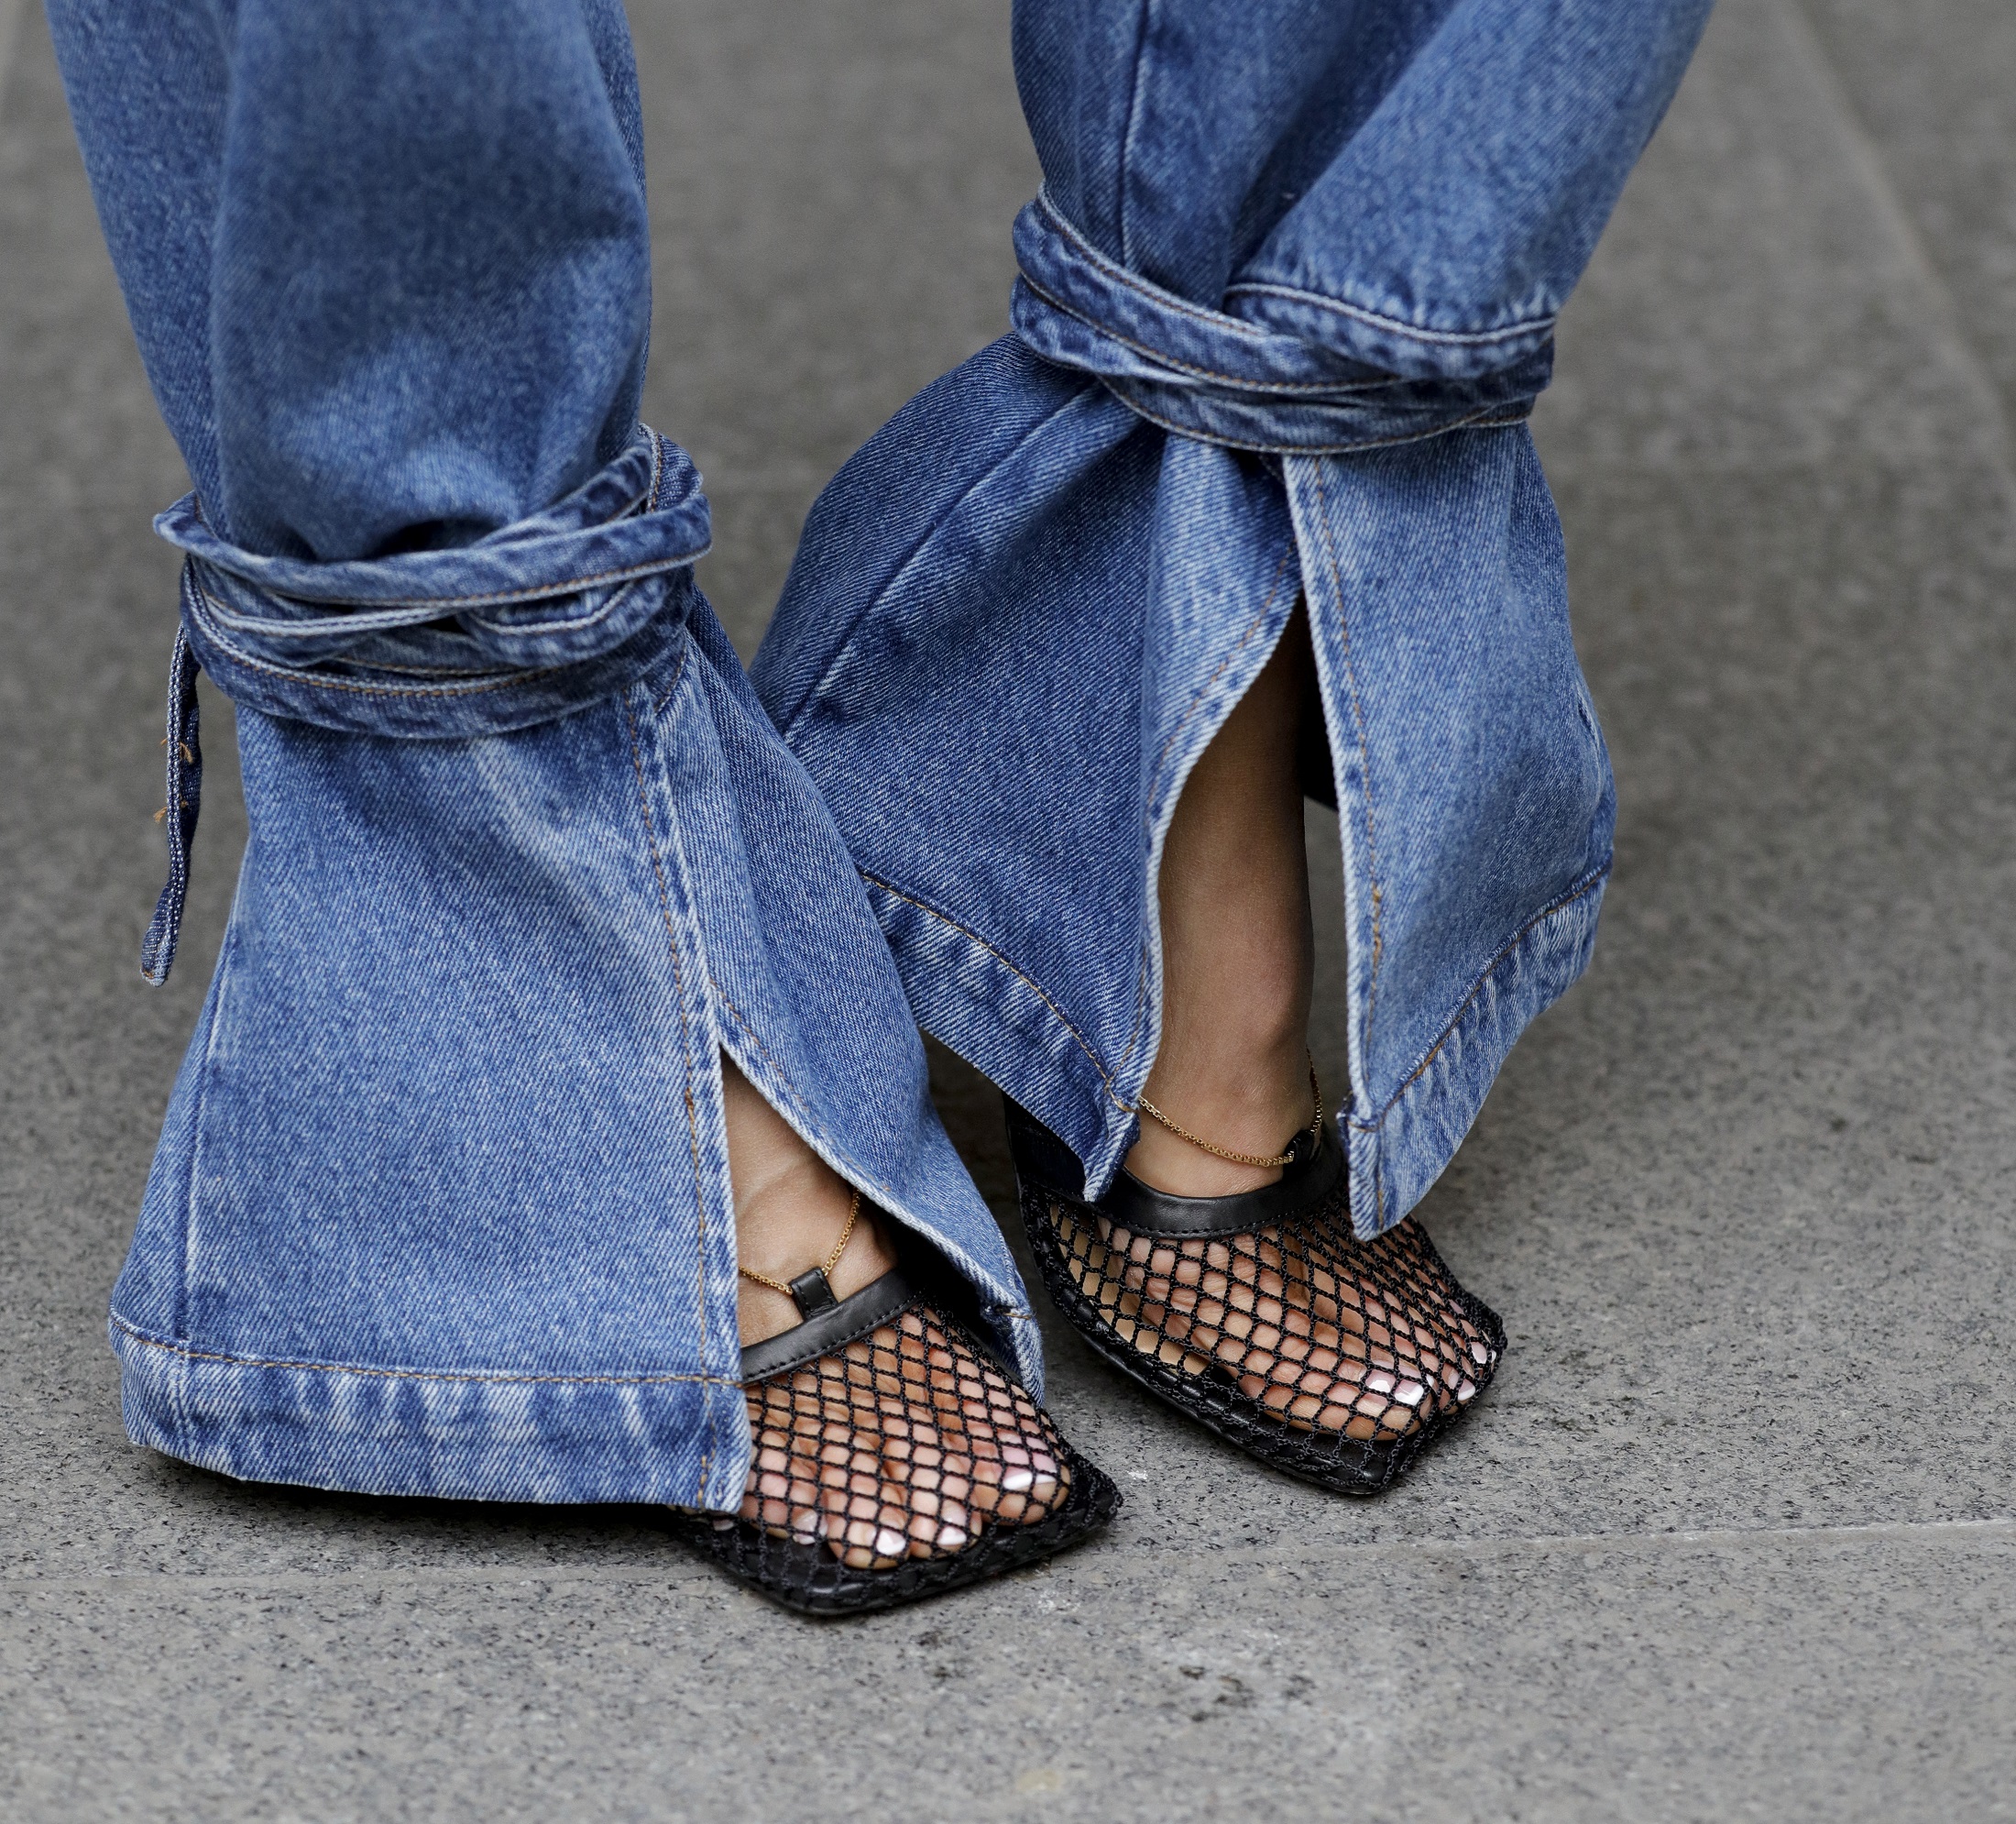 Although they used to be a symbol of cliché, today they rule the trends. Here’s how to wear square-toe shoes